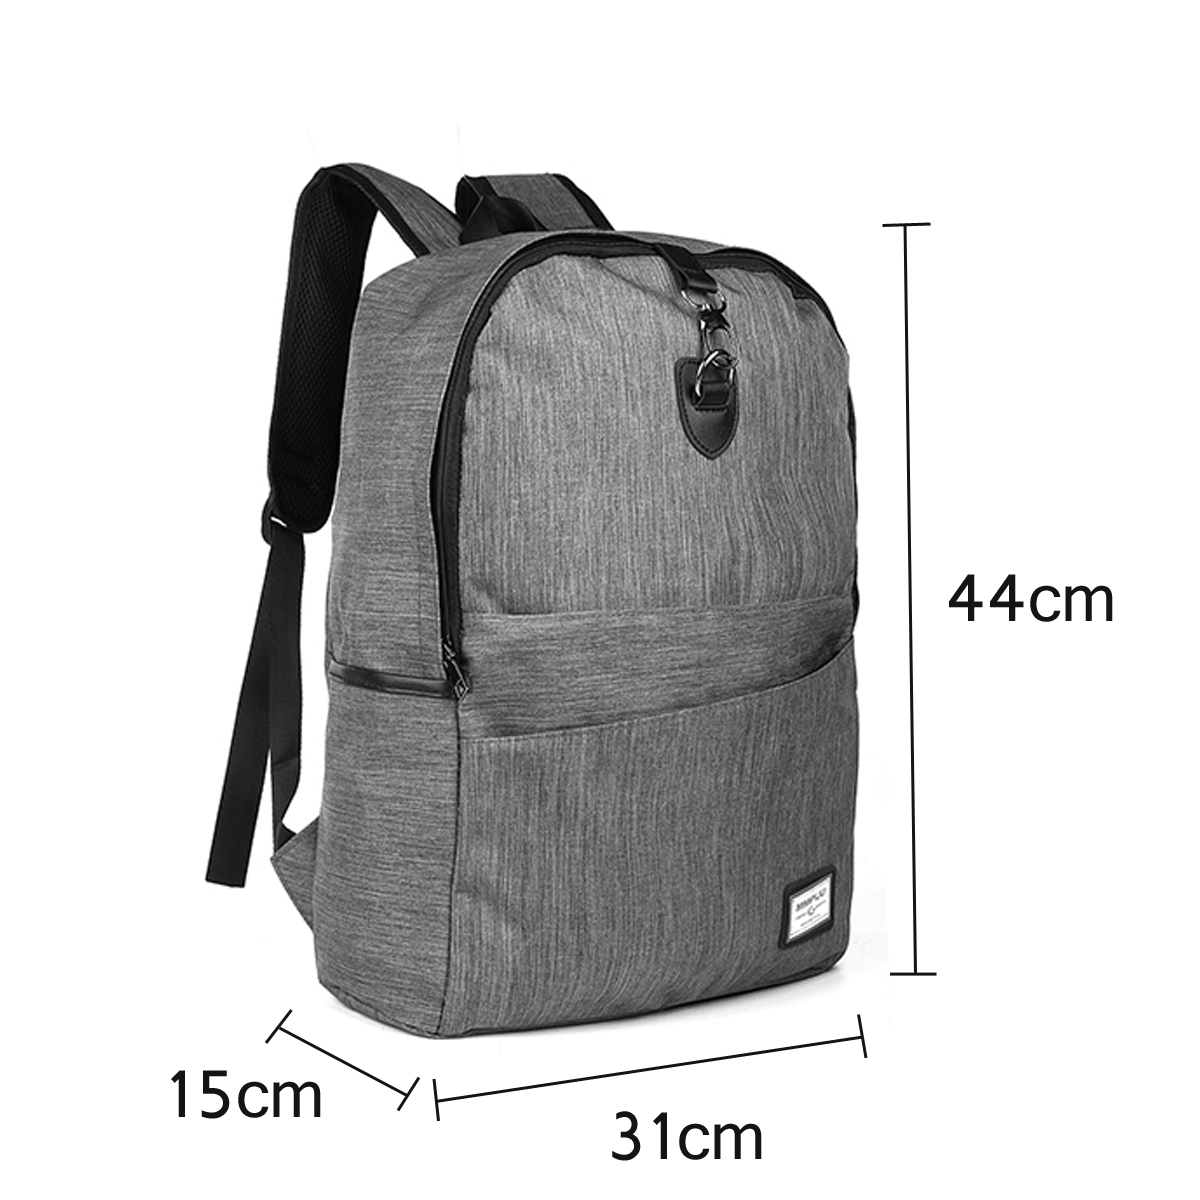 USB-Charging-Backpack-Anti-Thief-Laptop-Travel-Shoulder-Bag-with-Headphone-Plug-for-Macbook-1266101-2